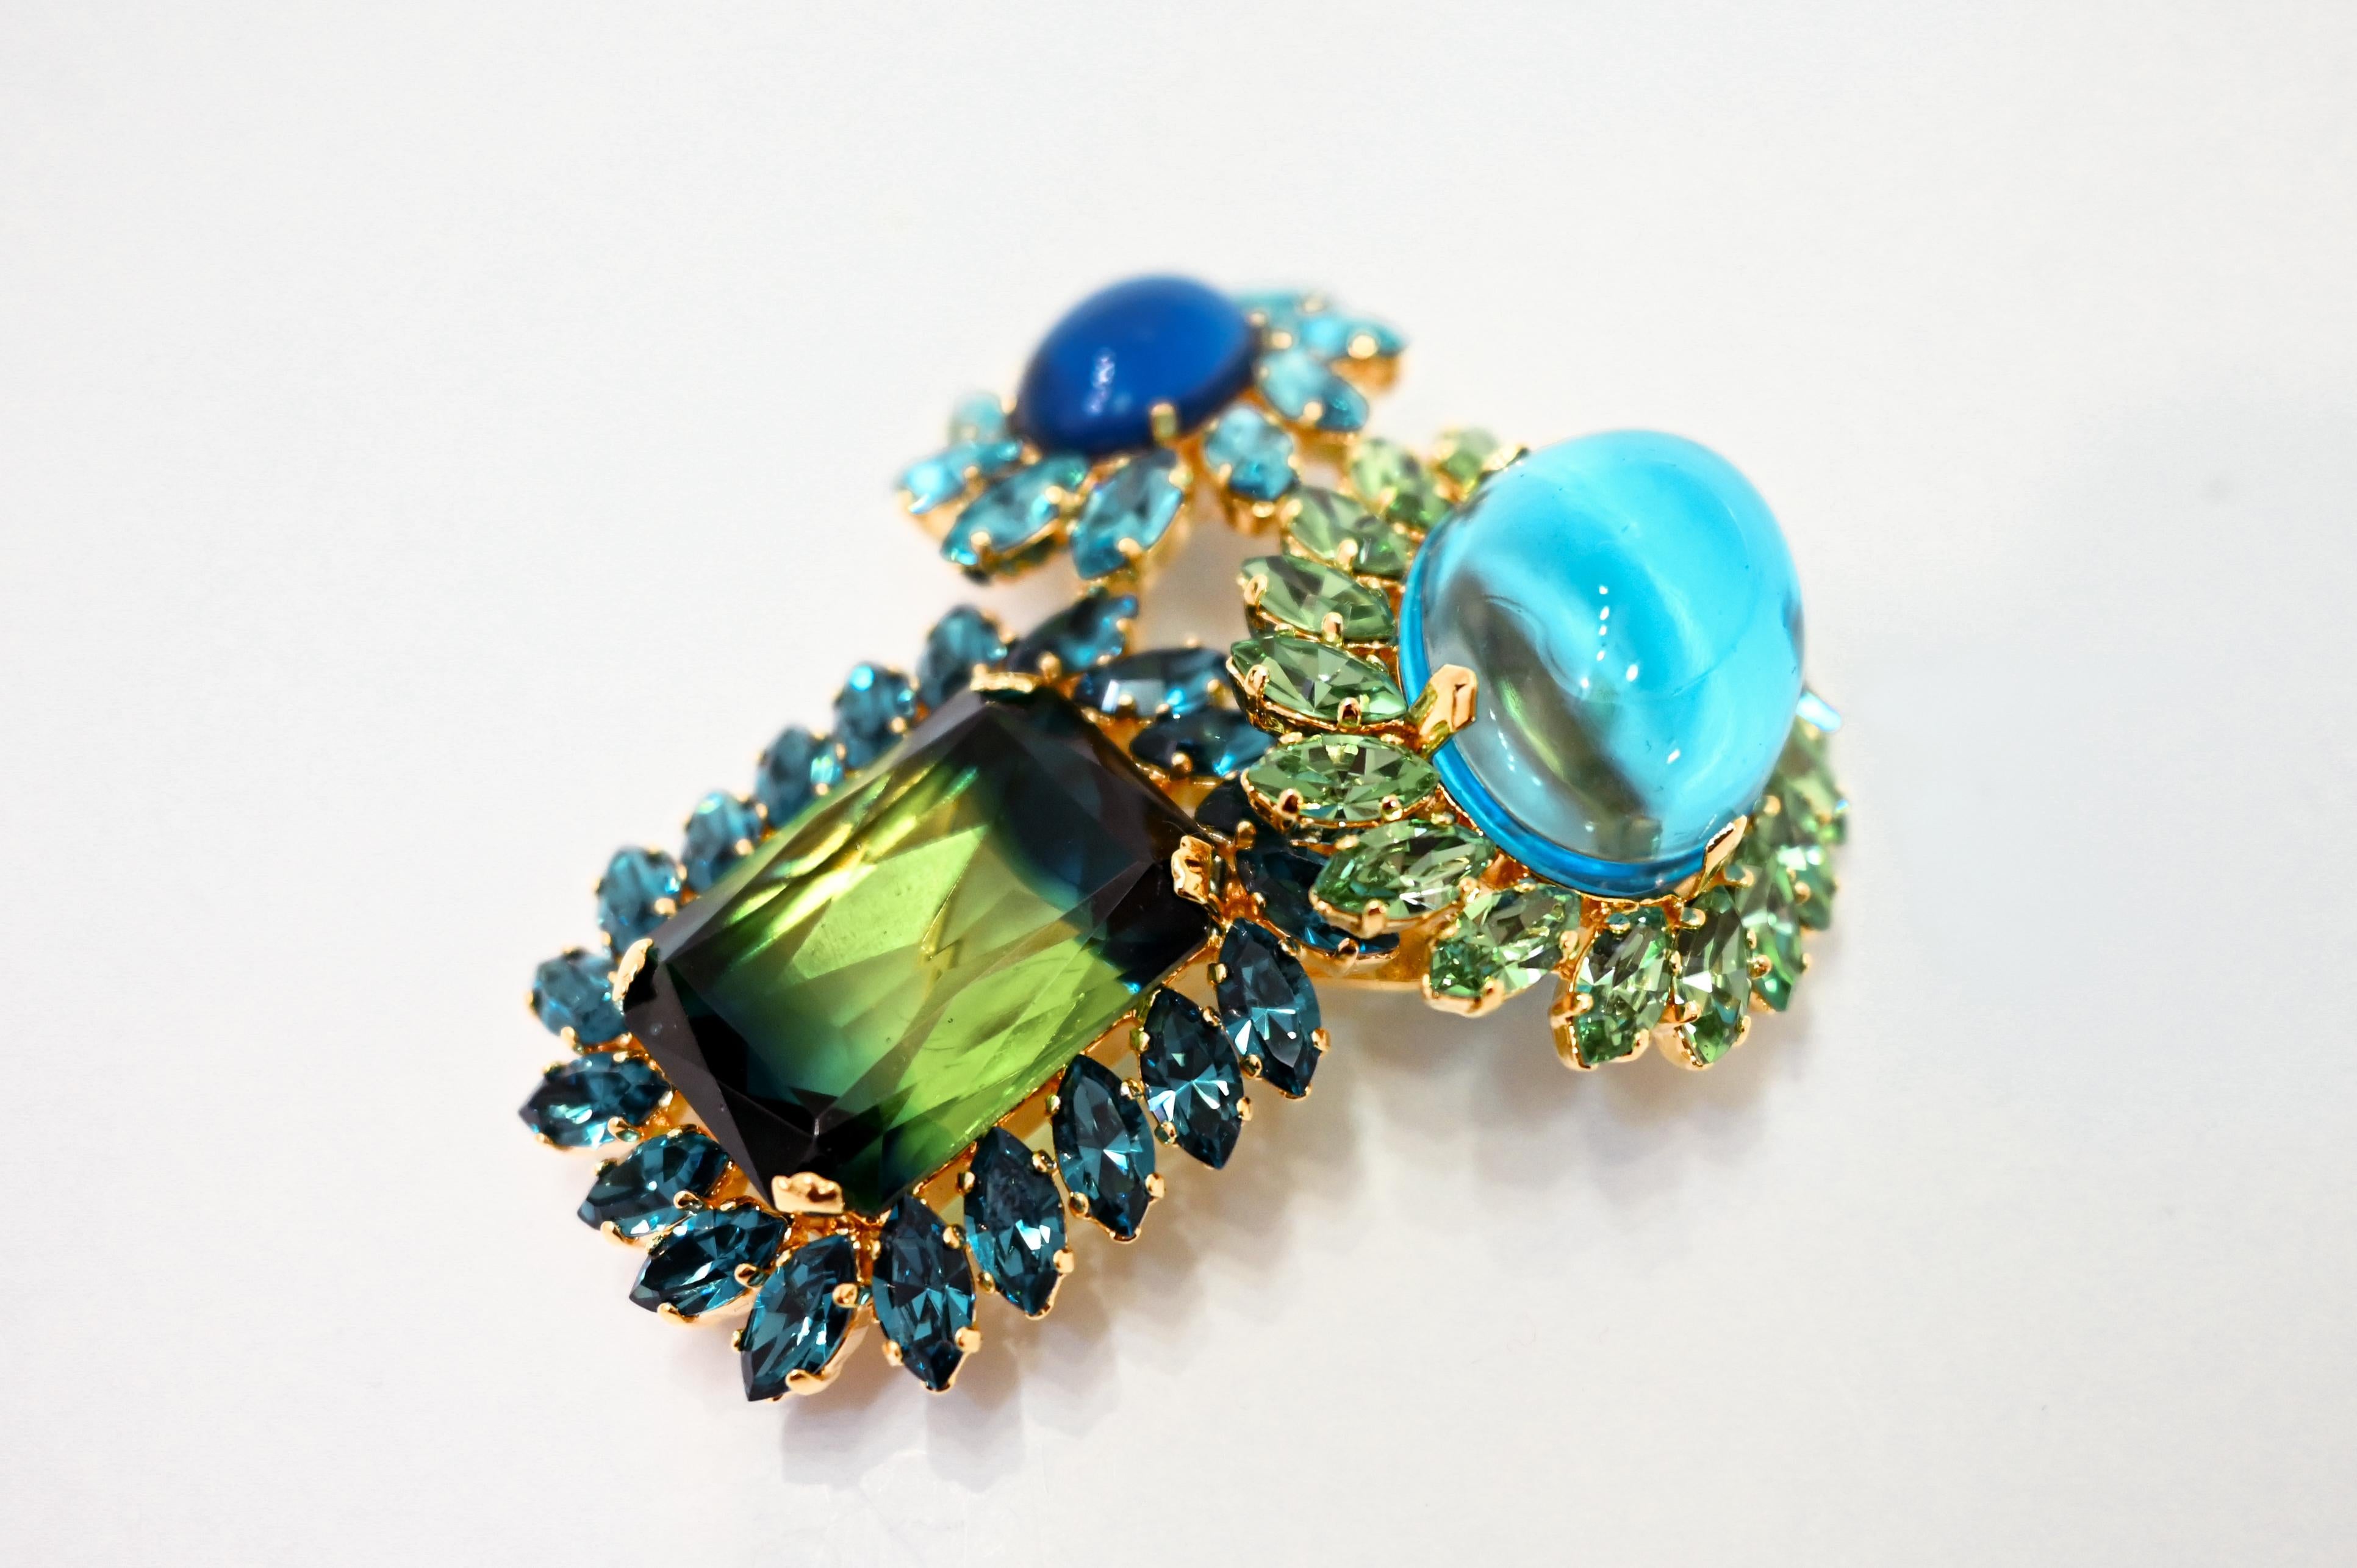 Swarovski crystals in beautiful mix of blues and greens. 1 of 2 pieces especially for Isabelle K Jewelry made in Philippe Ferrandis atelier in Paris. 
Philippe Ferrandis has been a parurier in Paris since 1986. He creates two collections a year,